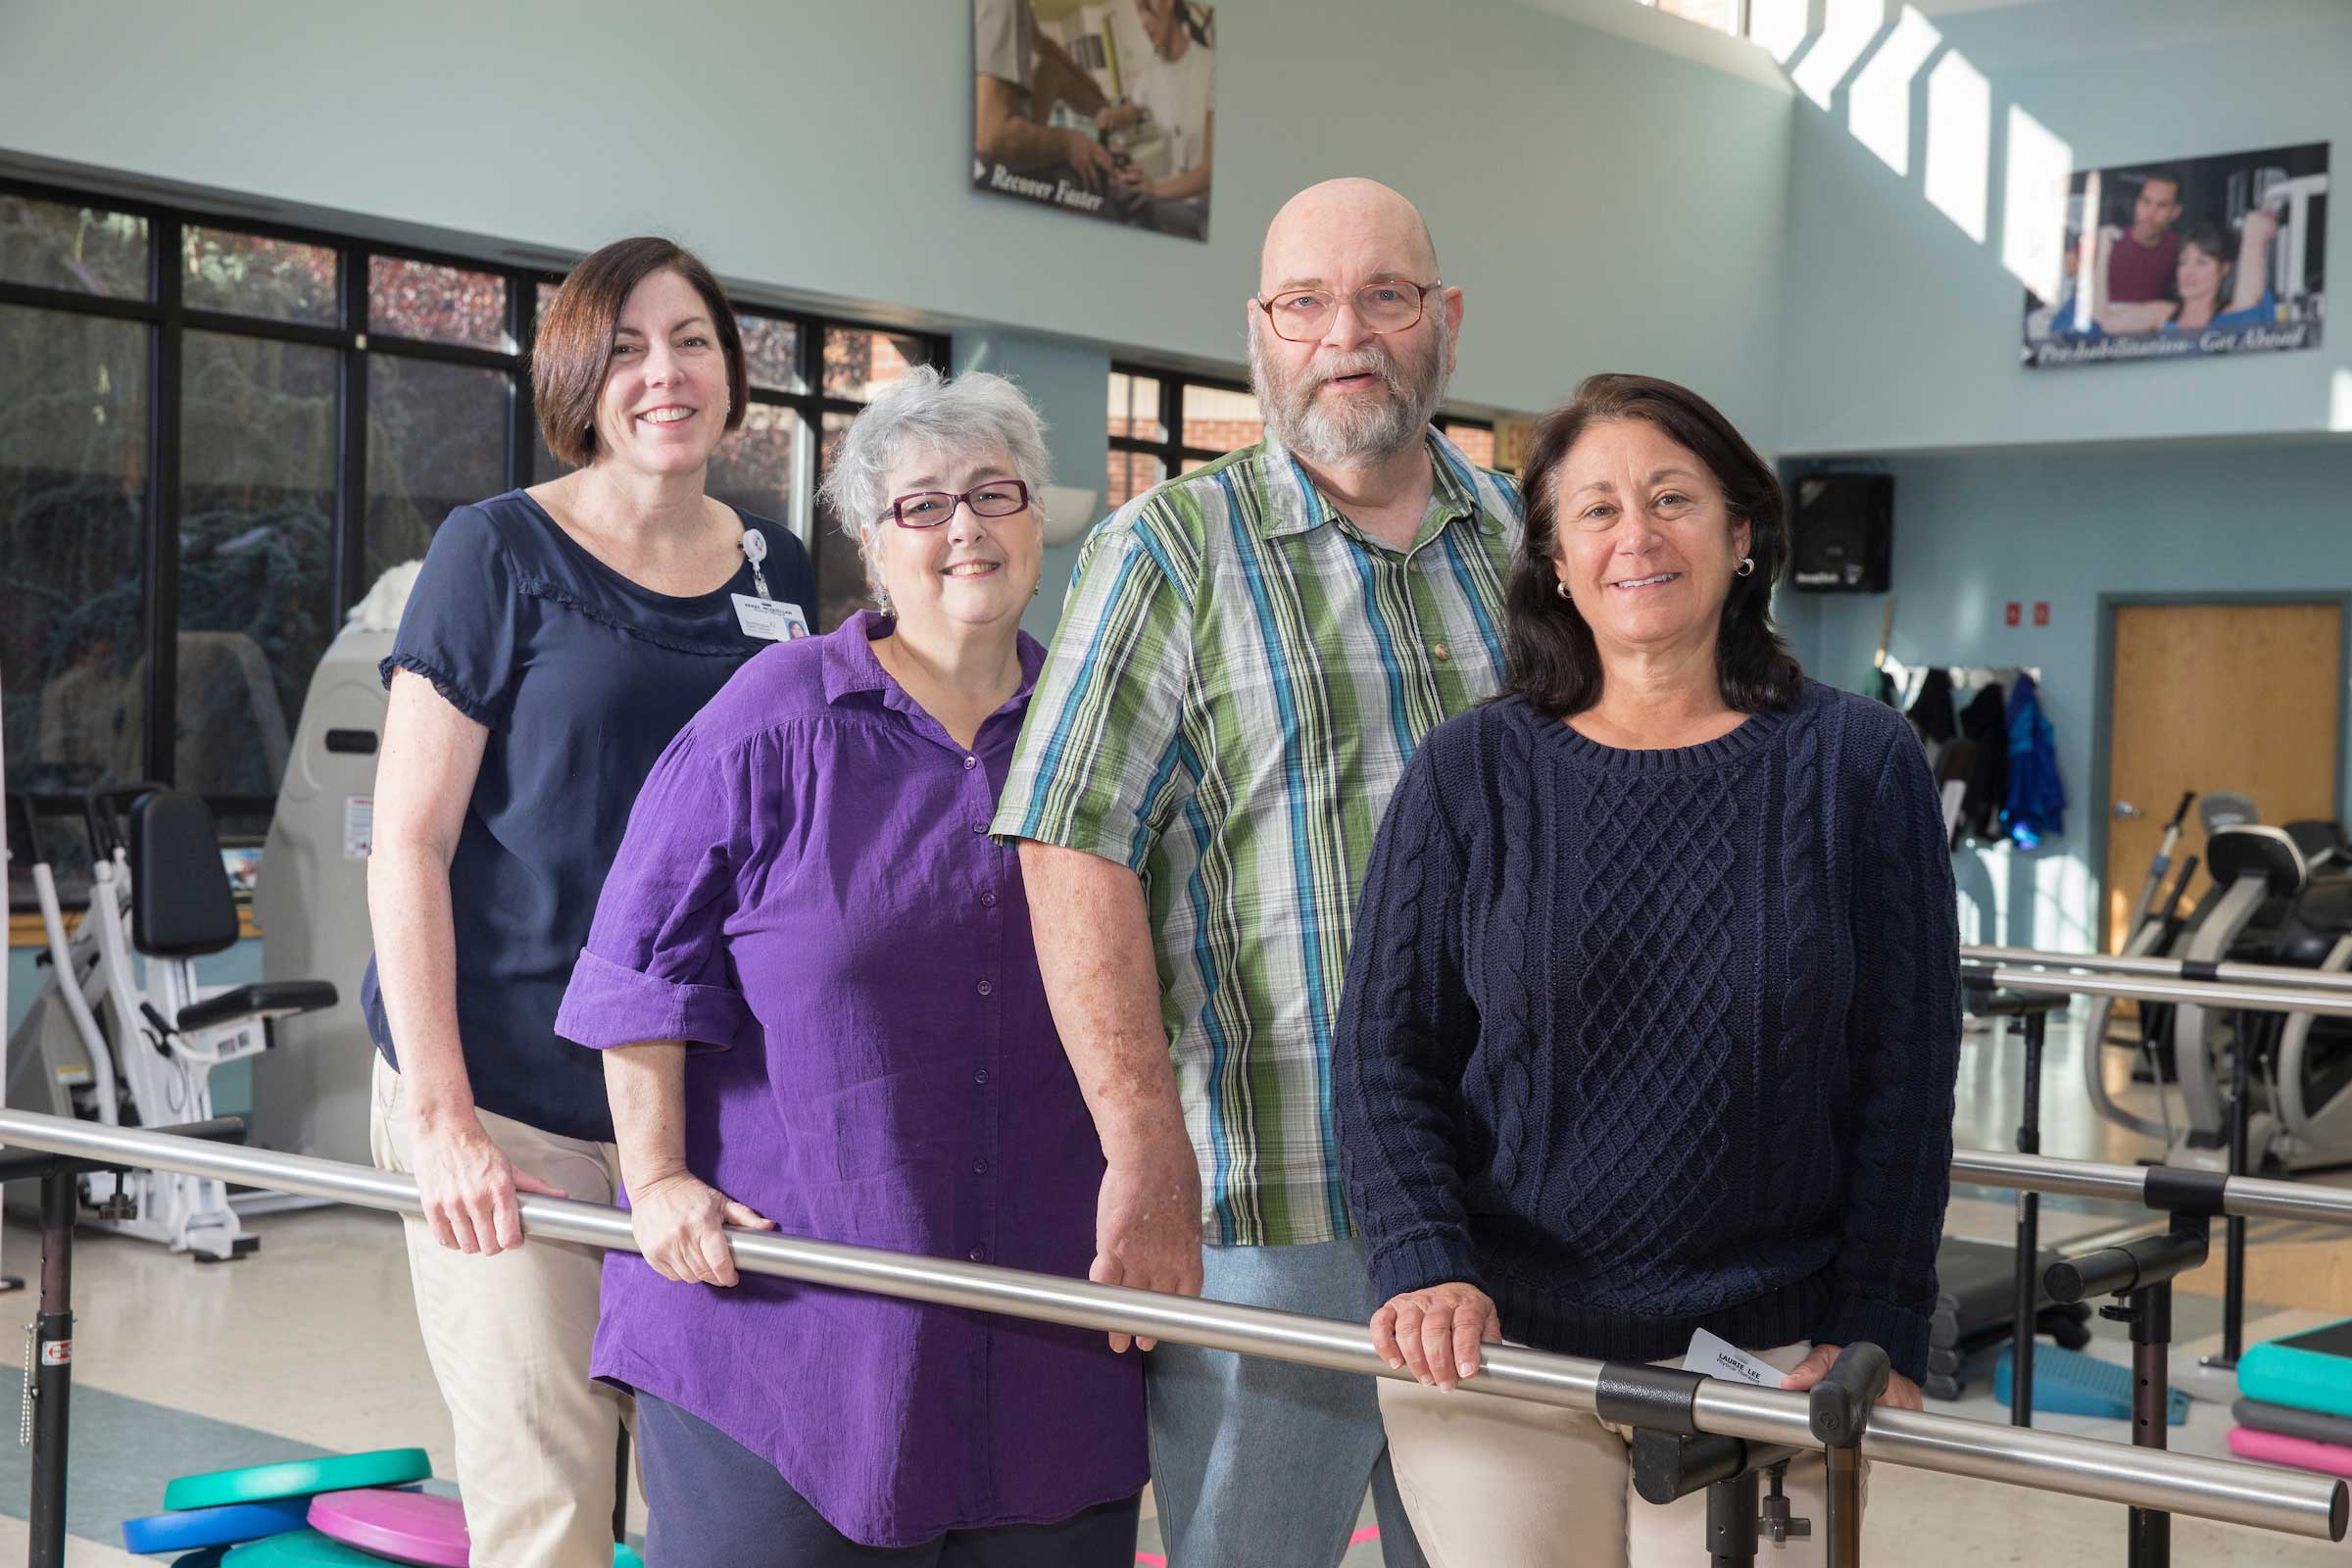 In the Hospital of Central Connecticut’s therapy pavilion: from left, Kerri McQuillan (registered (registered play therapist), Arlene Palmer and Dan Palmerand Laurie Lee (physical therapist).